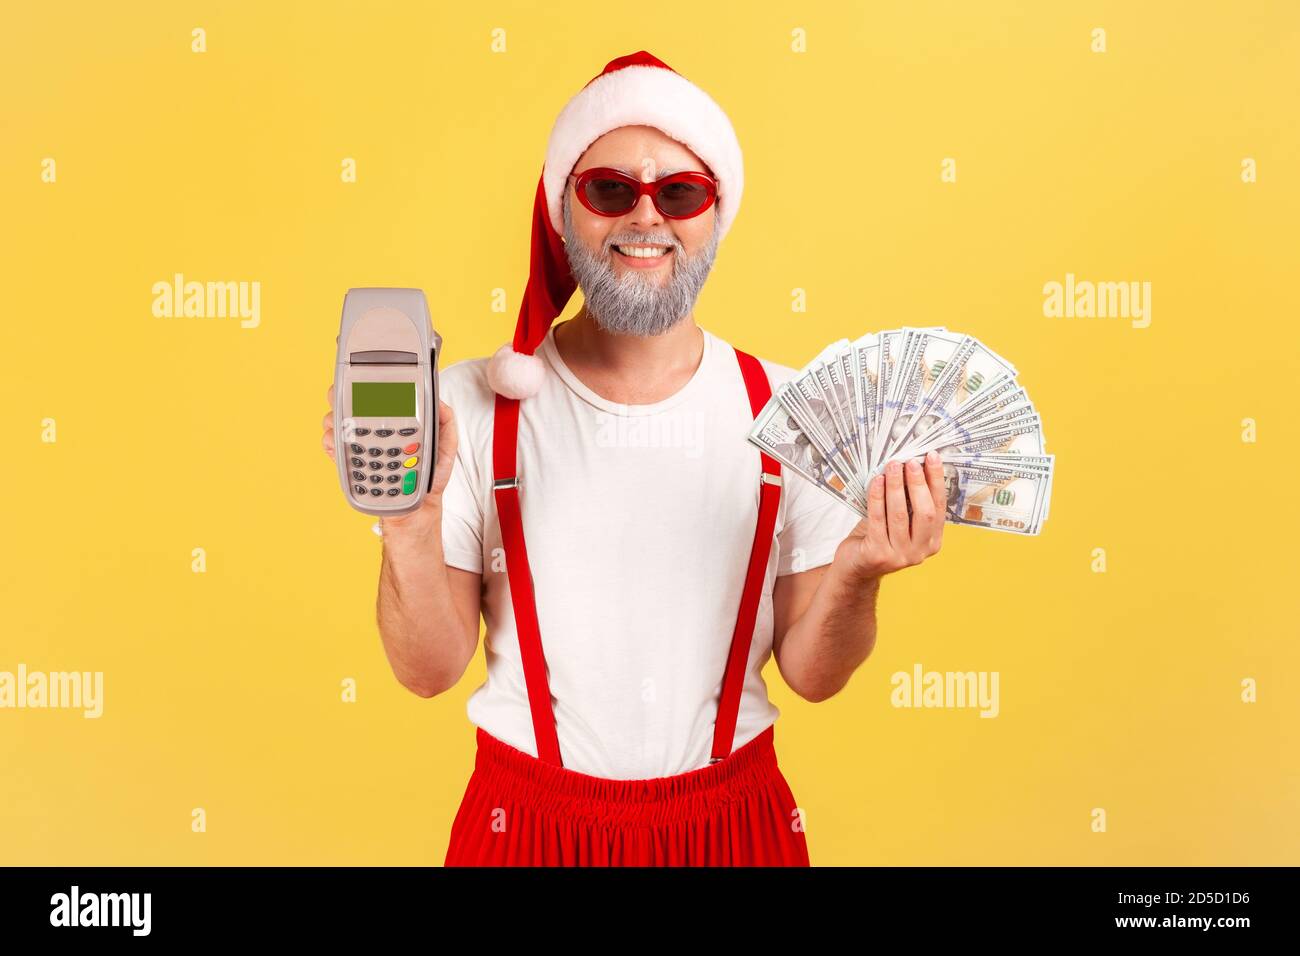 Positive adult man in sunglasses and santa claus hat holding pos terminal and dollar banknotes smiling at camera, choosing cashless payments. Indoor s Stock Photo